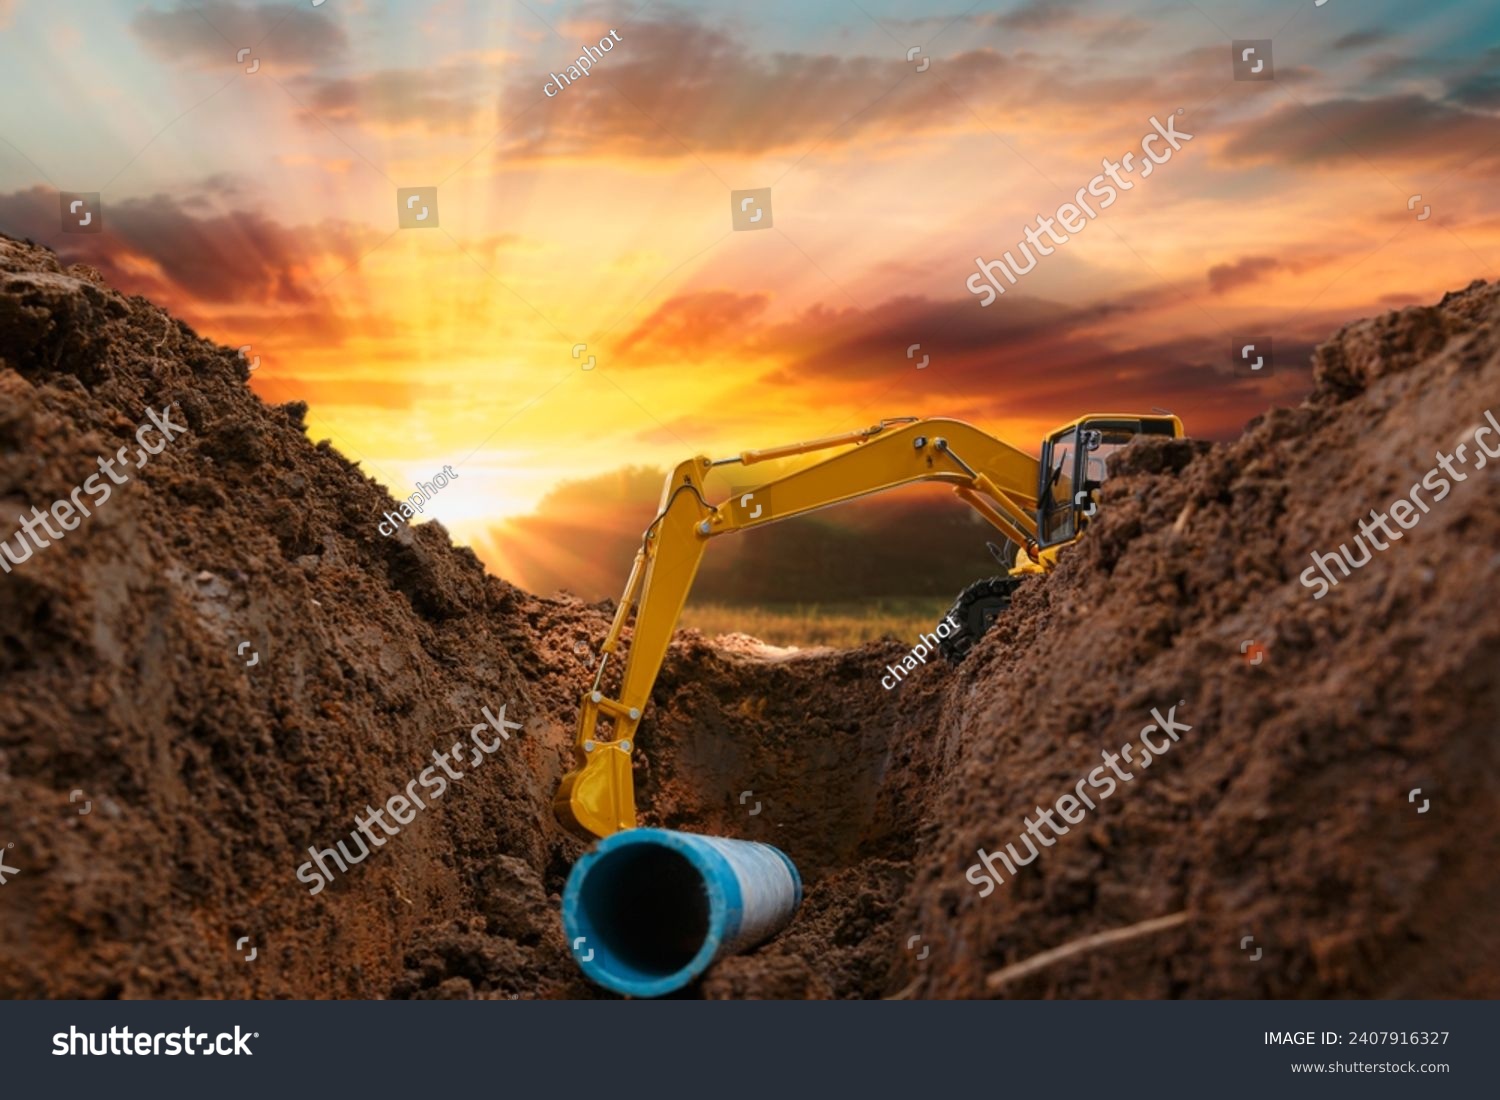 Crawler excavator is digging in the construction site pipeline work on sunset sky background #2407916327